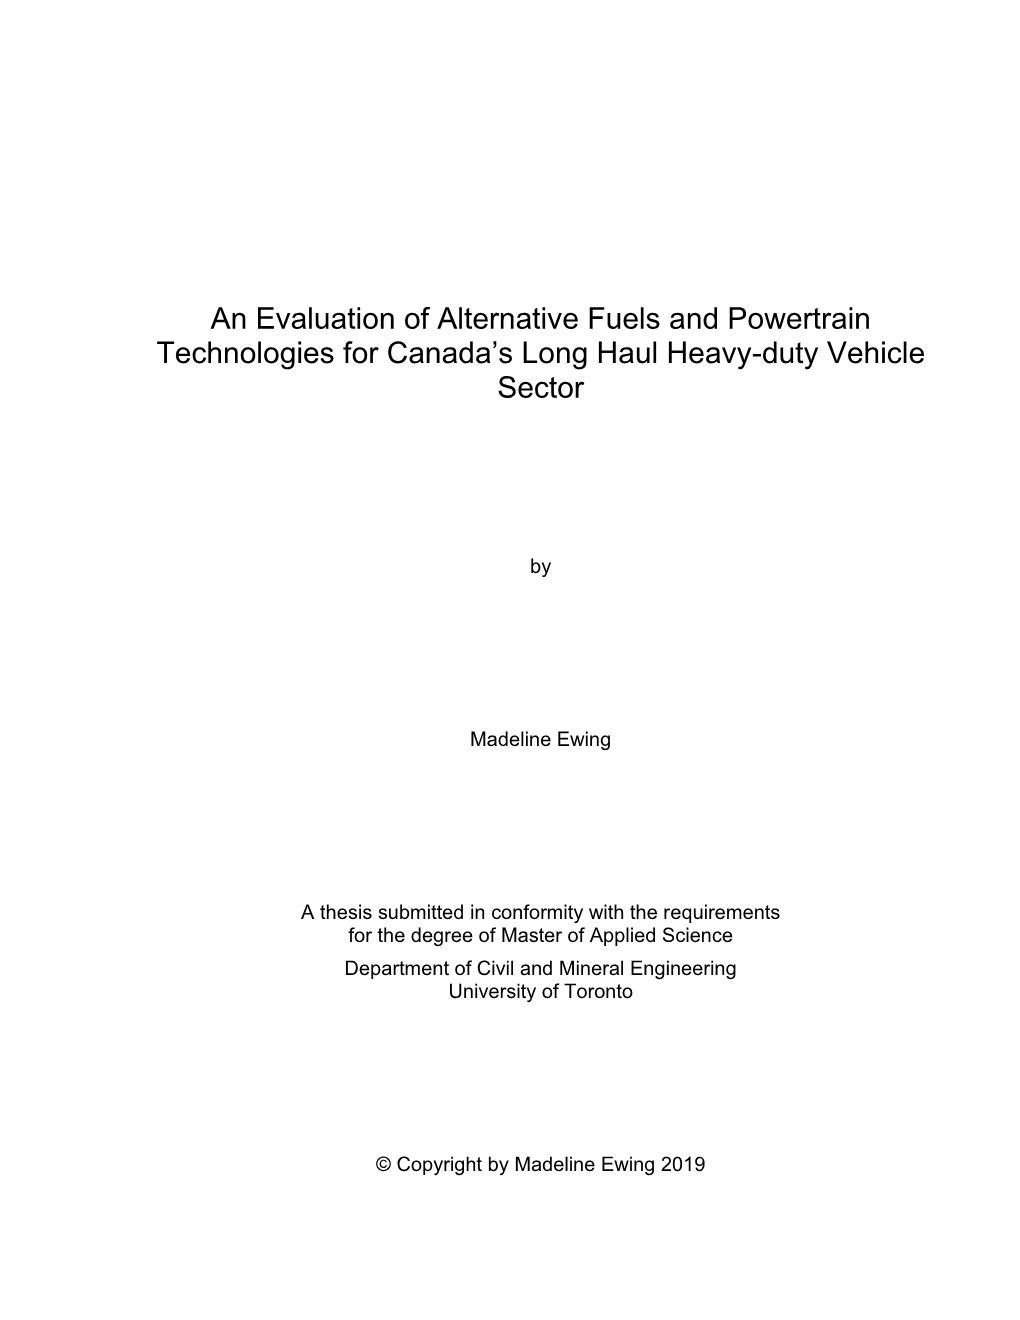 An Evaluation of Alternative Fuels and Powertrain Technologies for Canada’S Long Haul Heavy-Duty Vehicle Sector